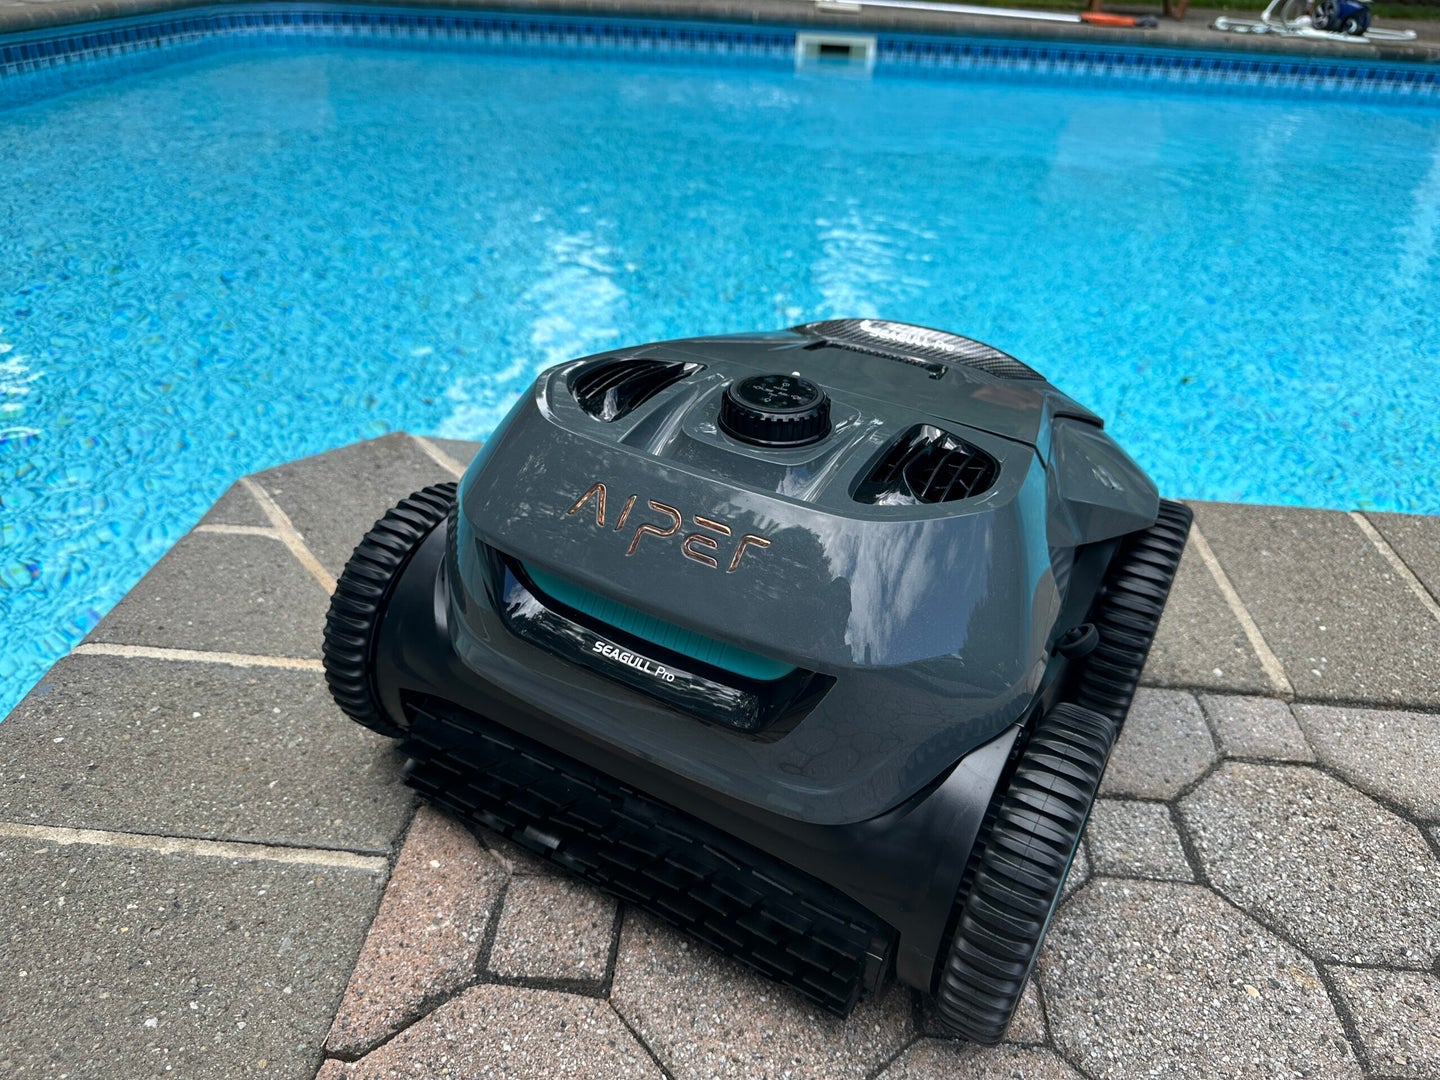 Aiper Seagull Pro Pool Vacuum next to a pool